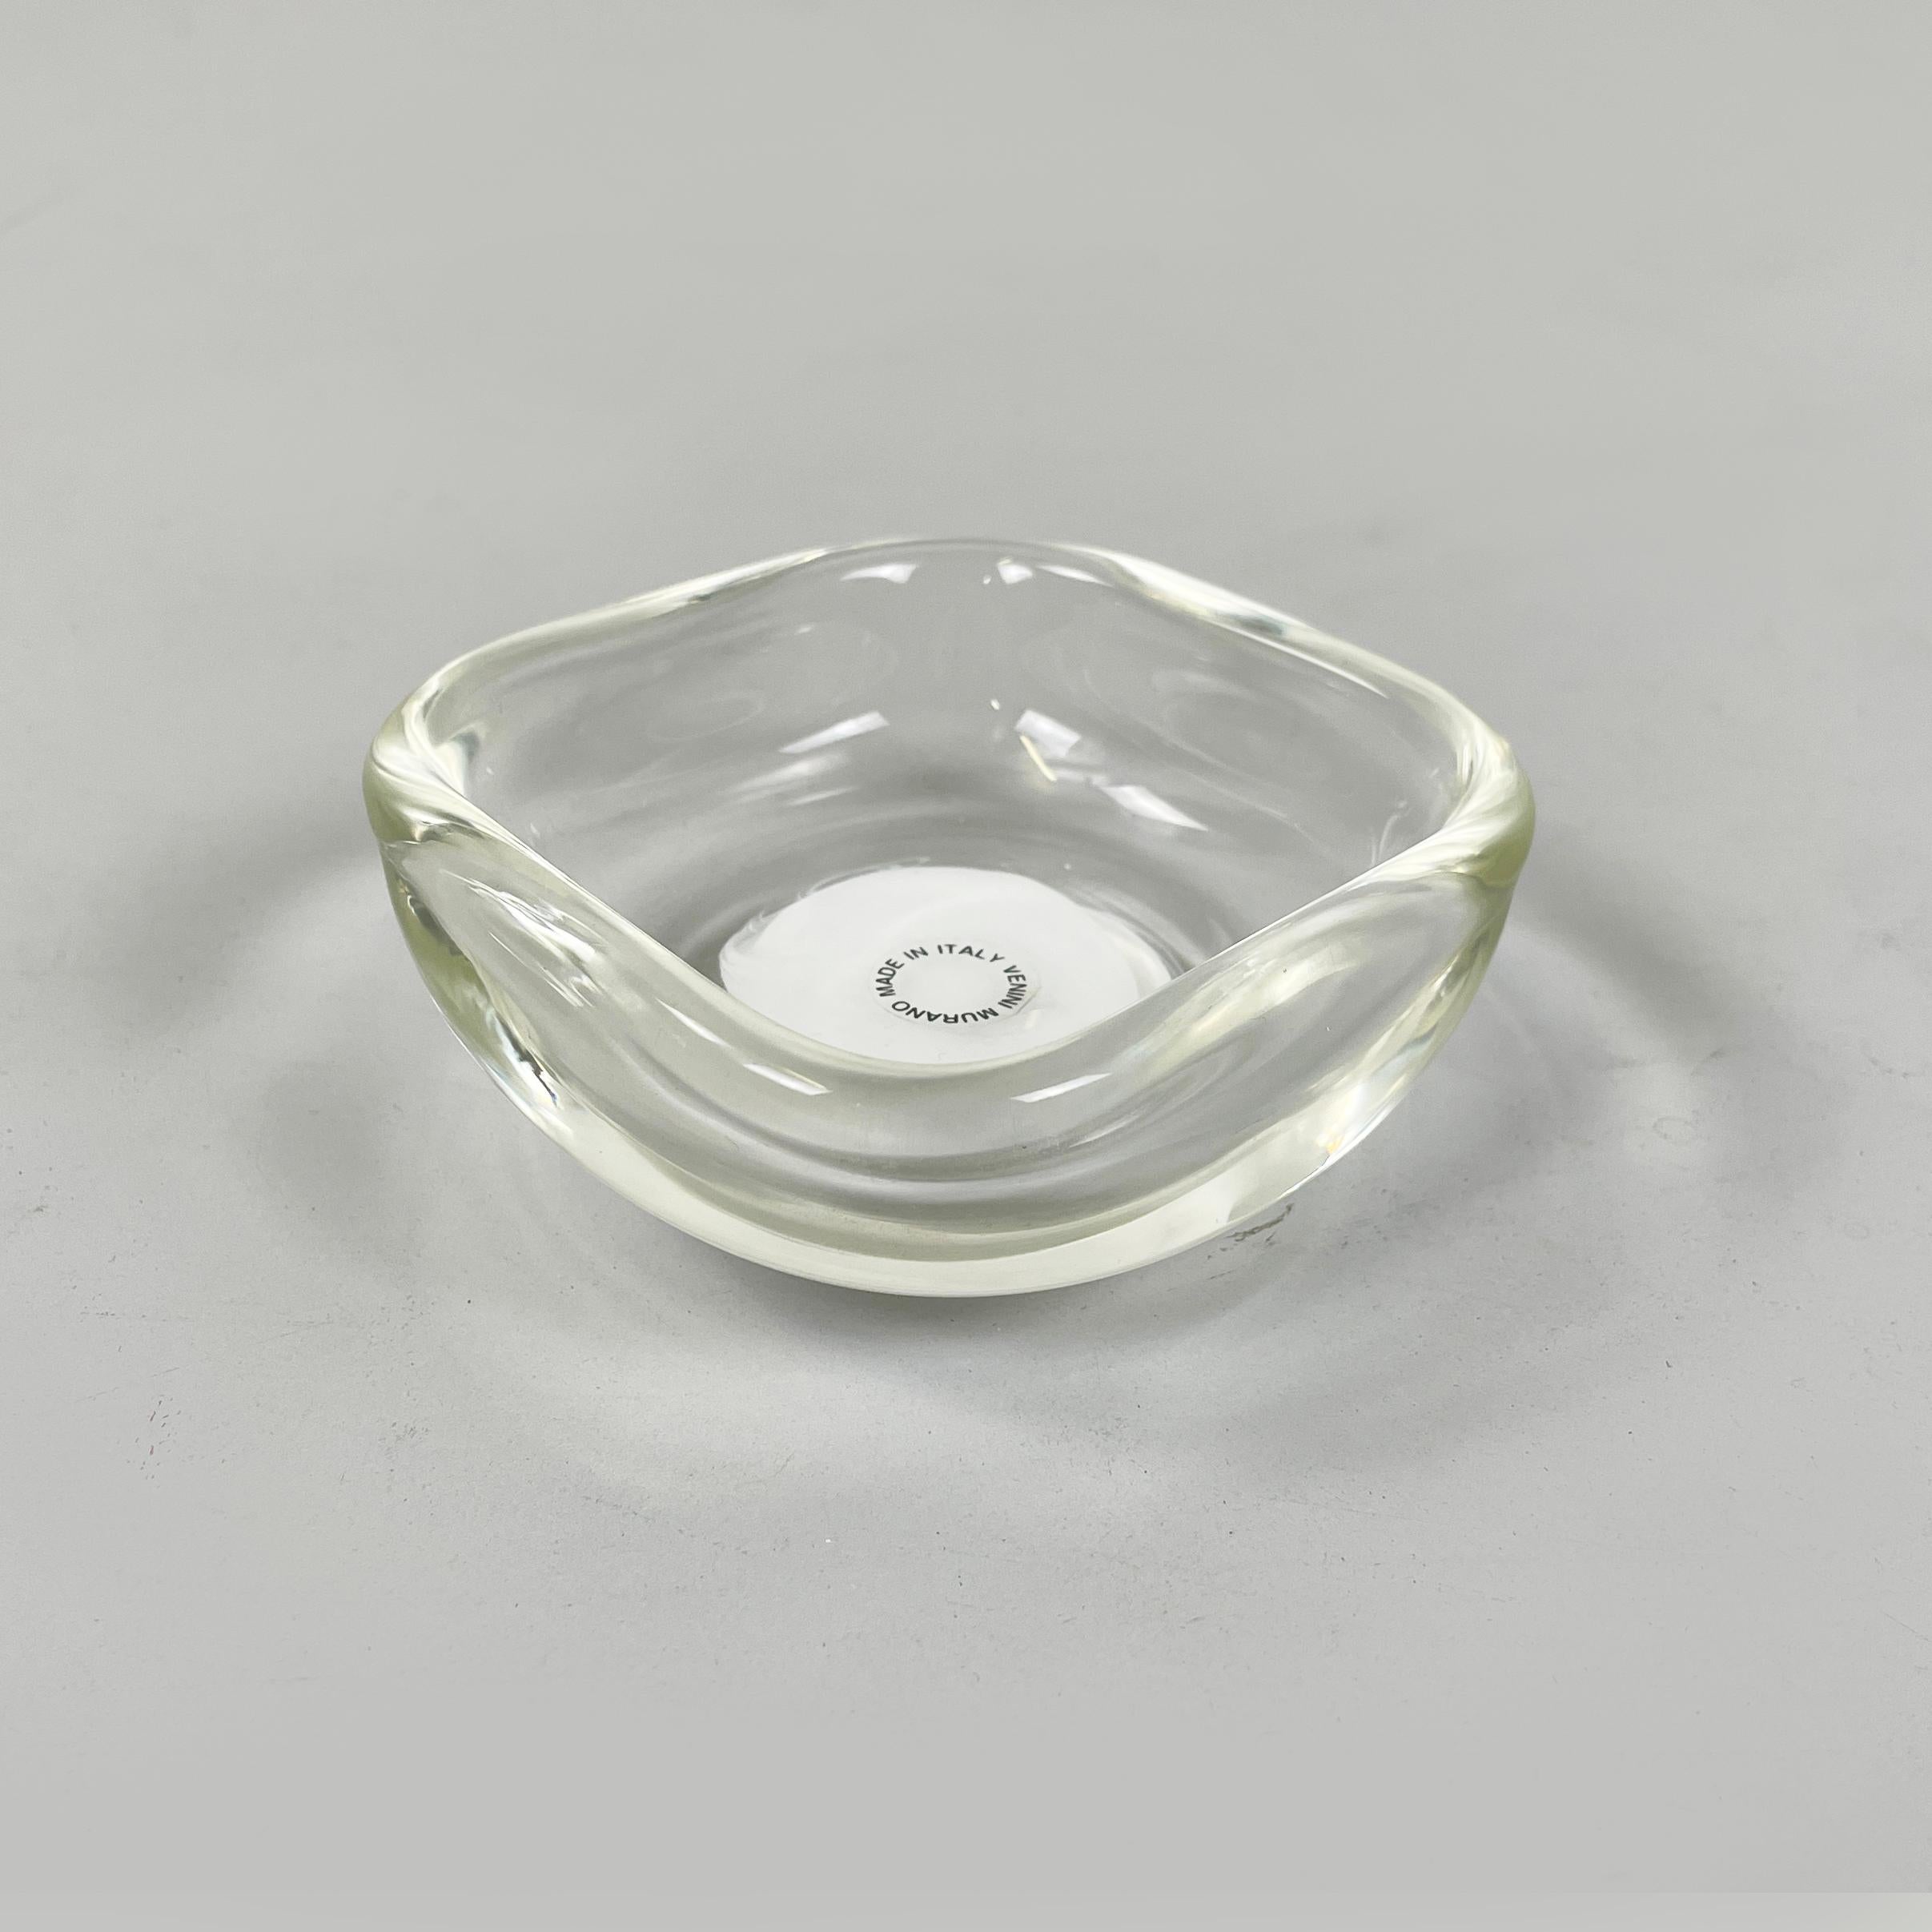 Italian modern Squared ashtray in transparent Murano glass by Venini, 1990s
Square base ashtray with rounded corners in transparent Murano glass. In the center it has a white glass part.
Produced by Venini in 1990. Label present.
Very good